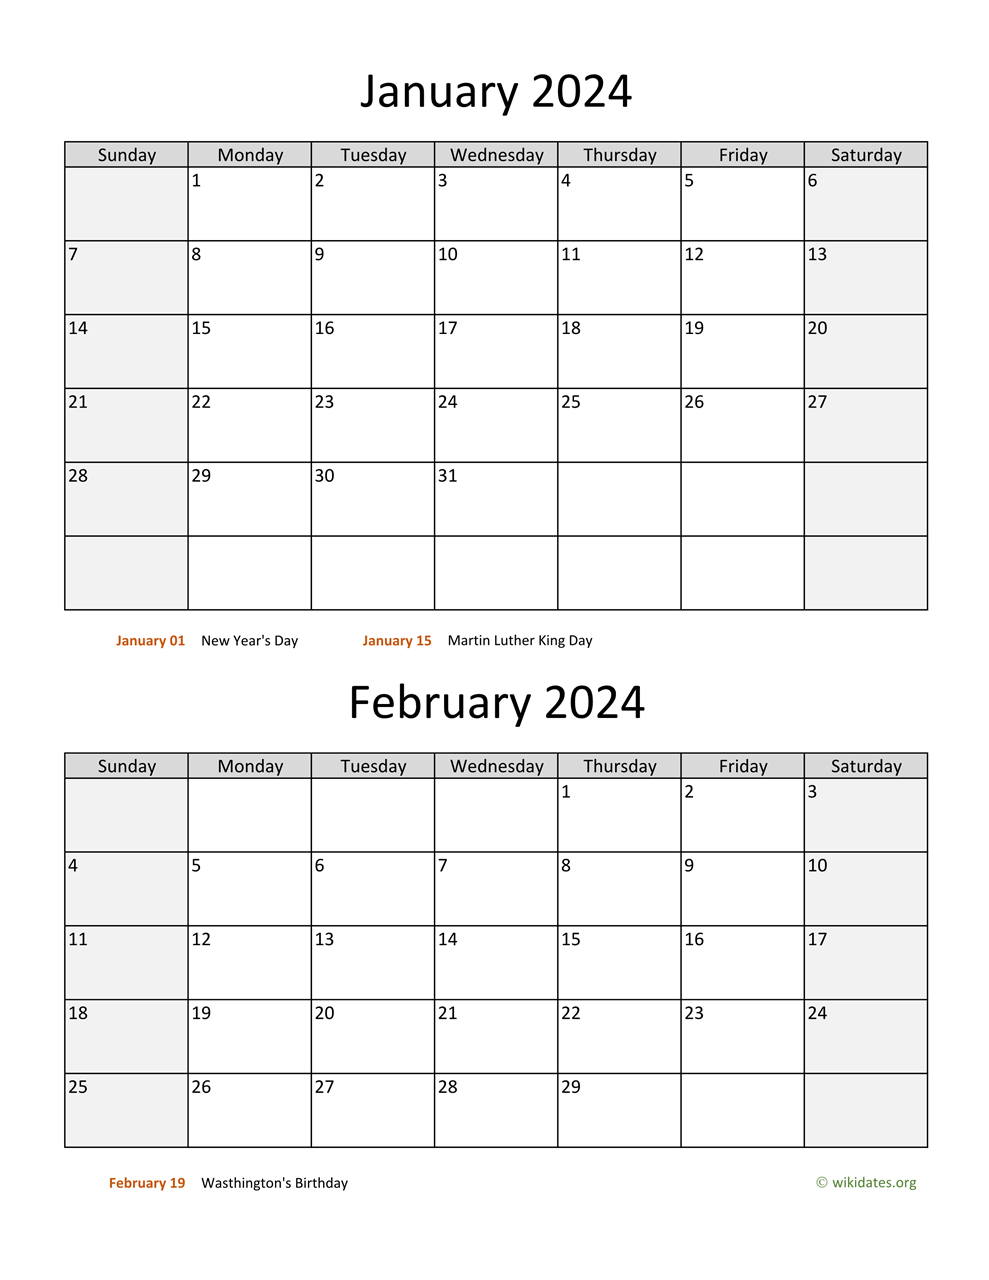 January And February 2024 Calendar | Wikidates for Printable Calendar 2024 January February